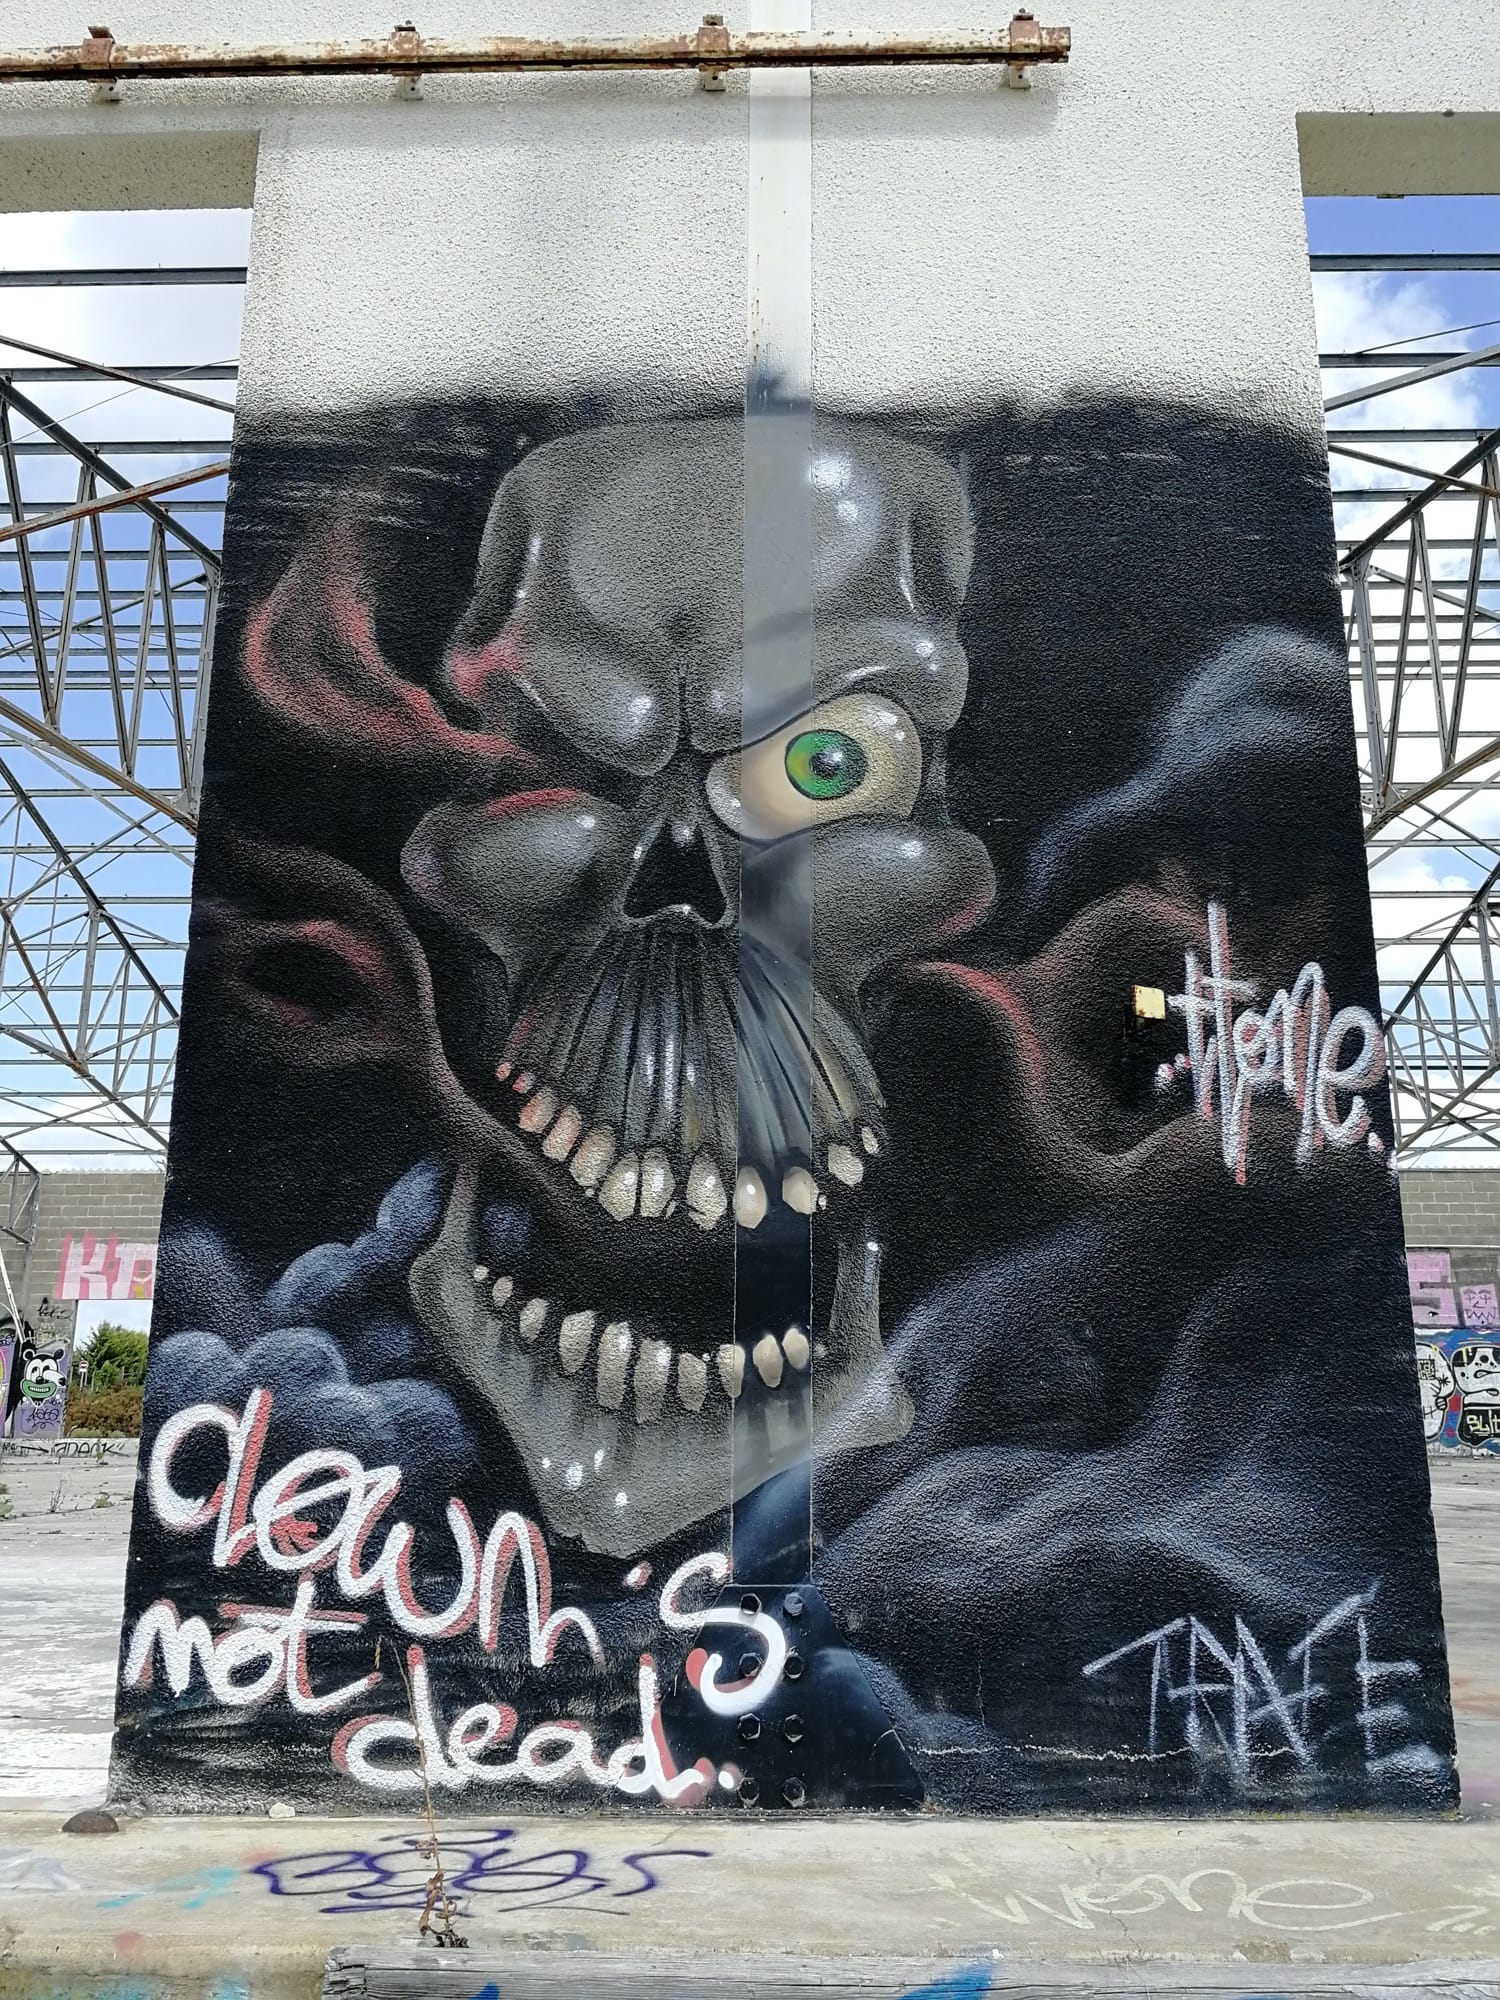 Graffiti 3088  by the artist T Tone captured by Rabot in Chantepie France